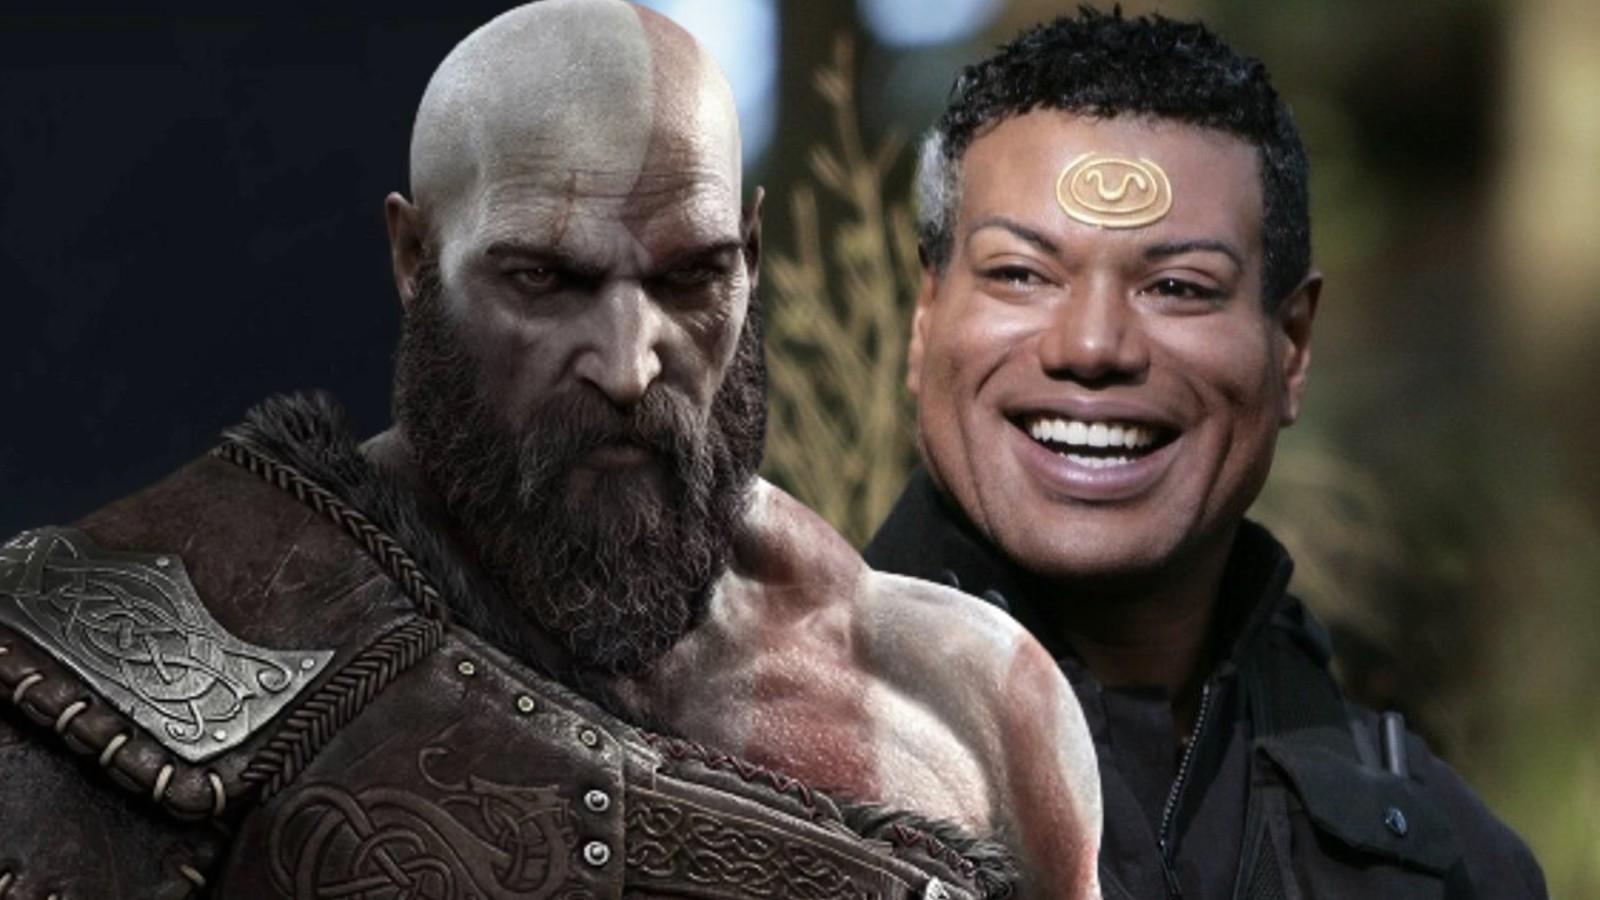 Kratos in God of War and Christopher Judge in Stargate